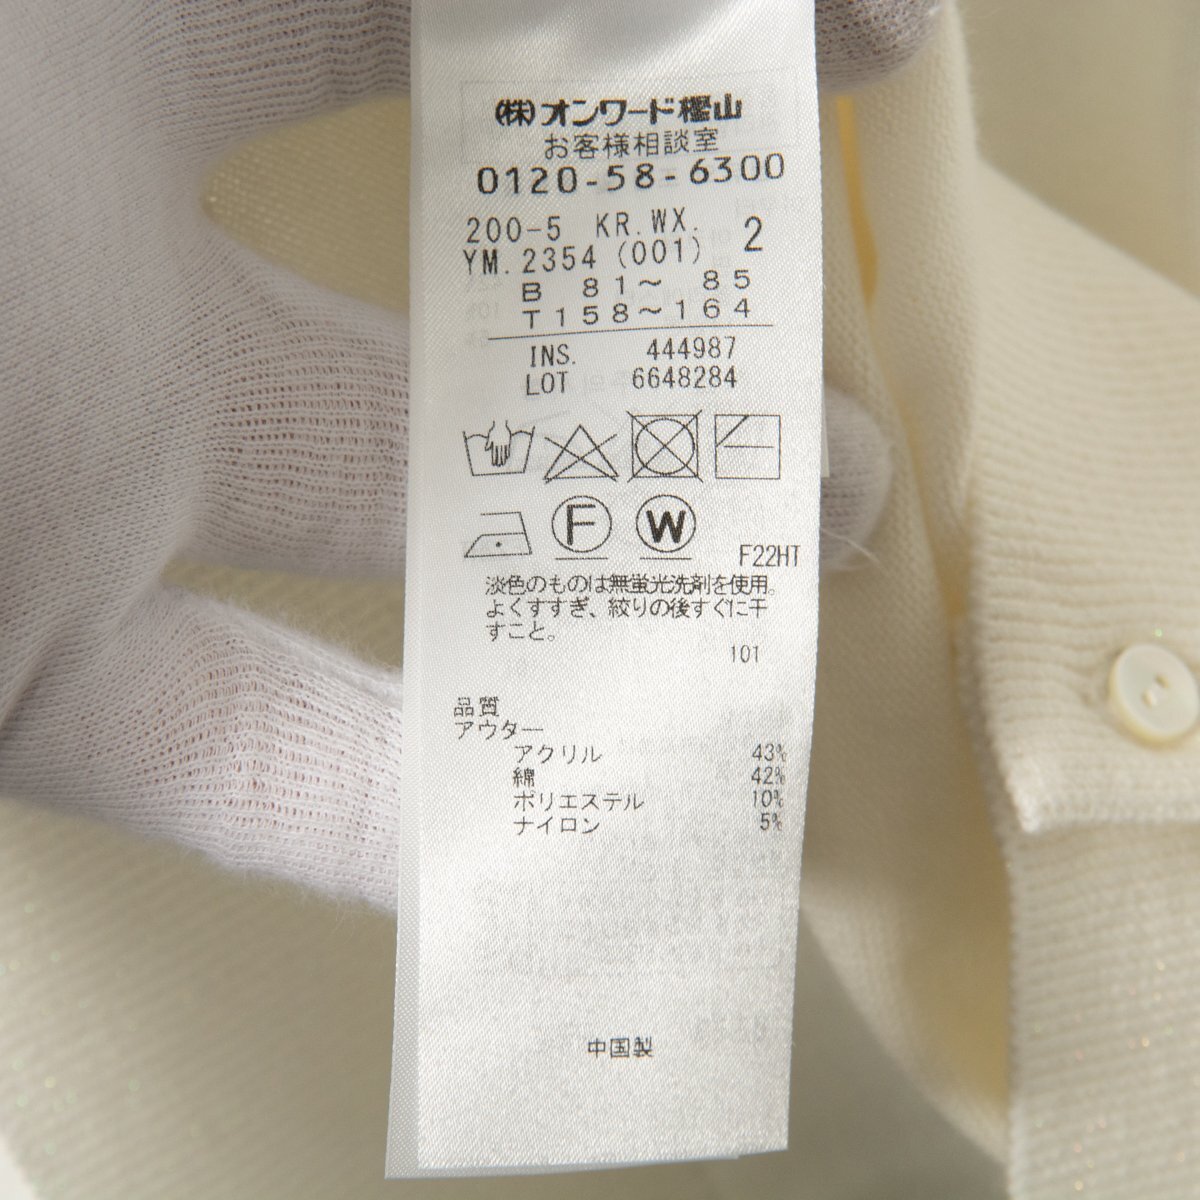  mail service 0 tag attaching unused goods Kumikyoku k Miki .k crew neck cardigan sweater white 2 lady's woman woman adult simple 